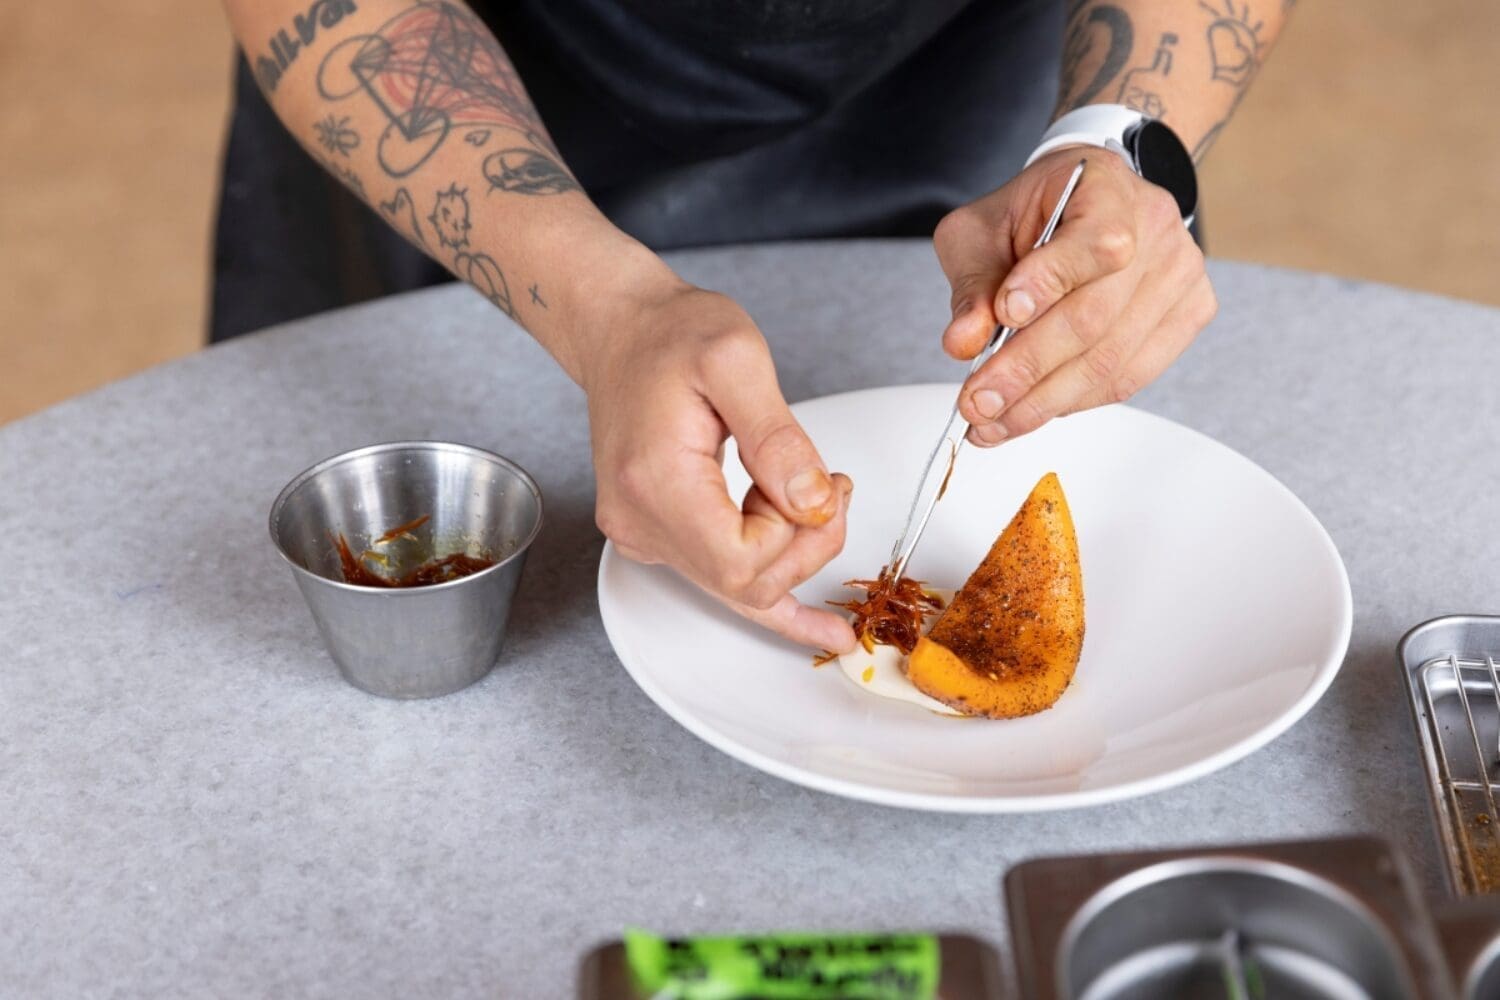 A chef plating a meal